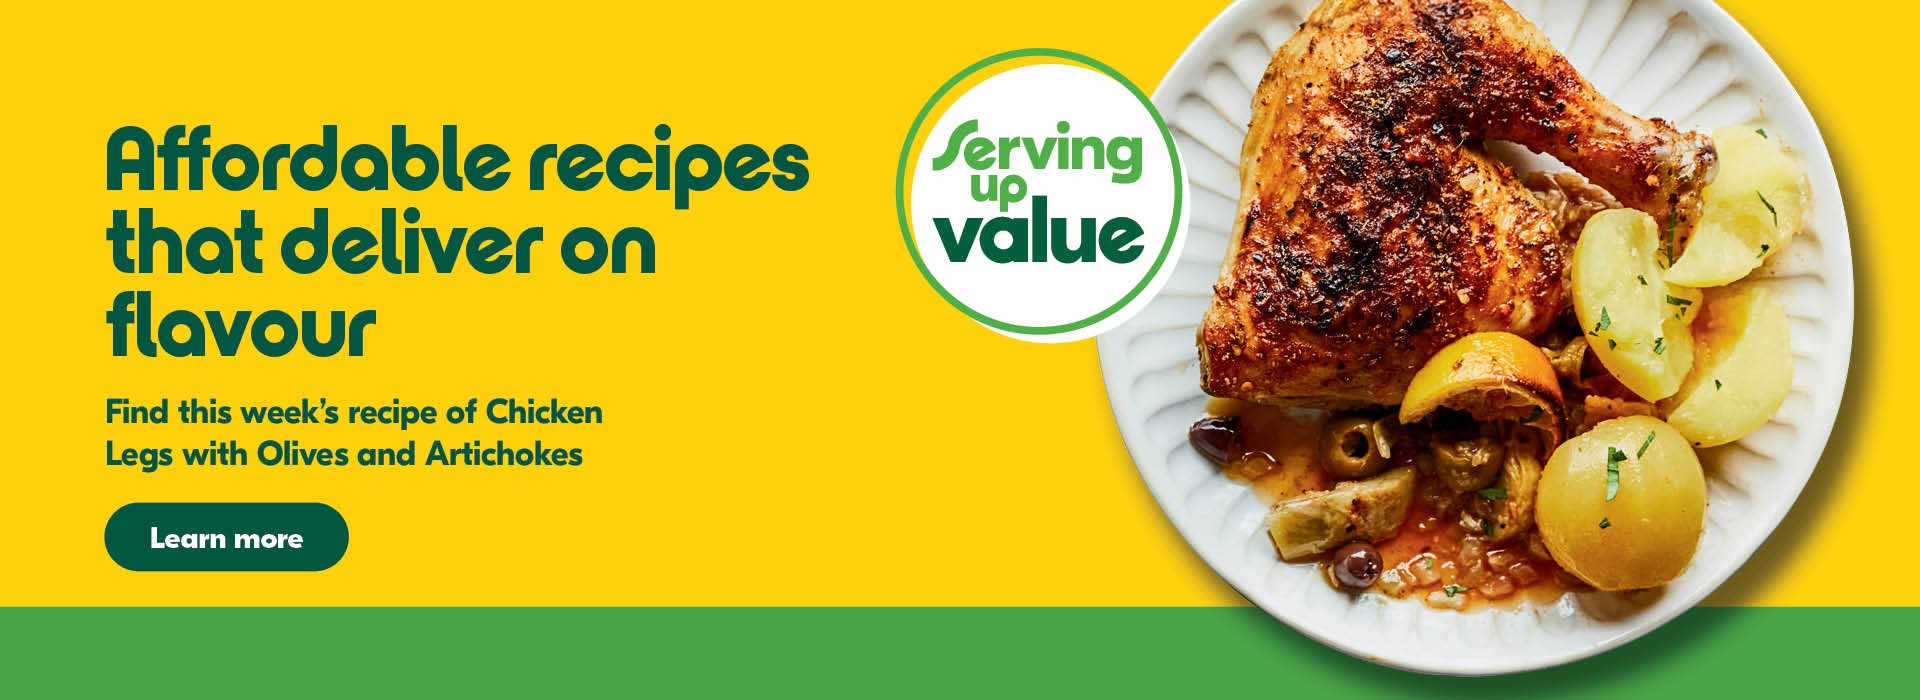 Affordable recipes that deliver on flavour; this weeks recipe is Chicken Legs with Olives and Artichokes